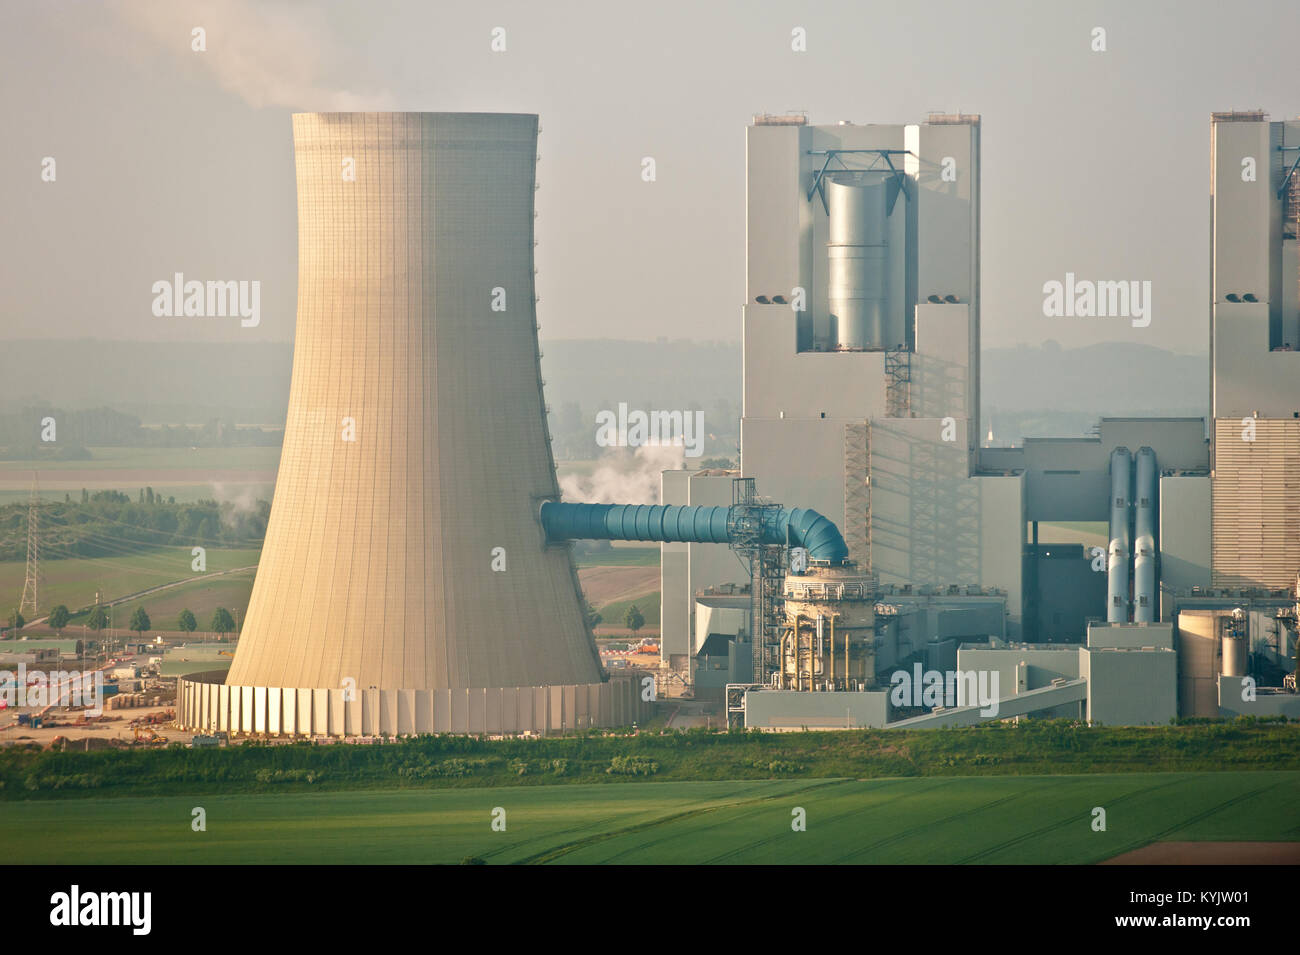 smoking chimney of a coal power plant Stock Photo